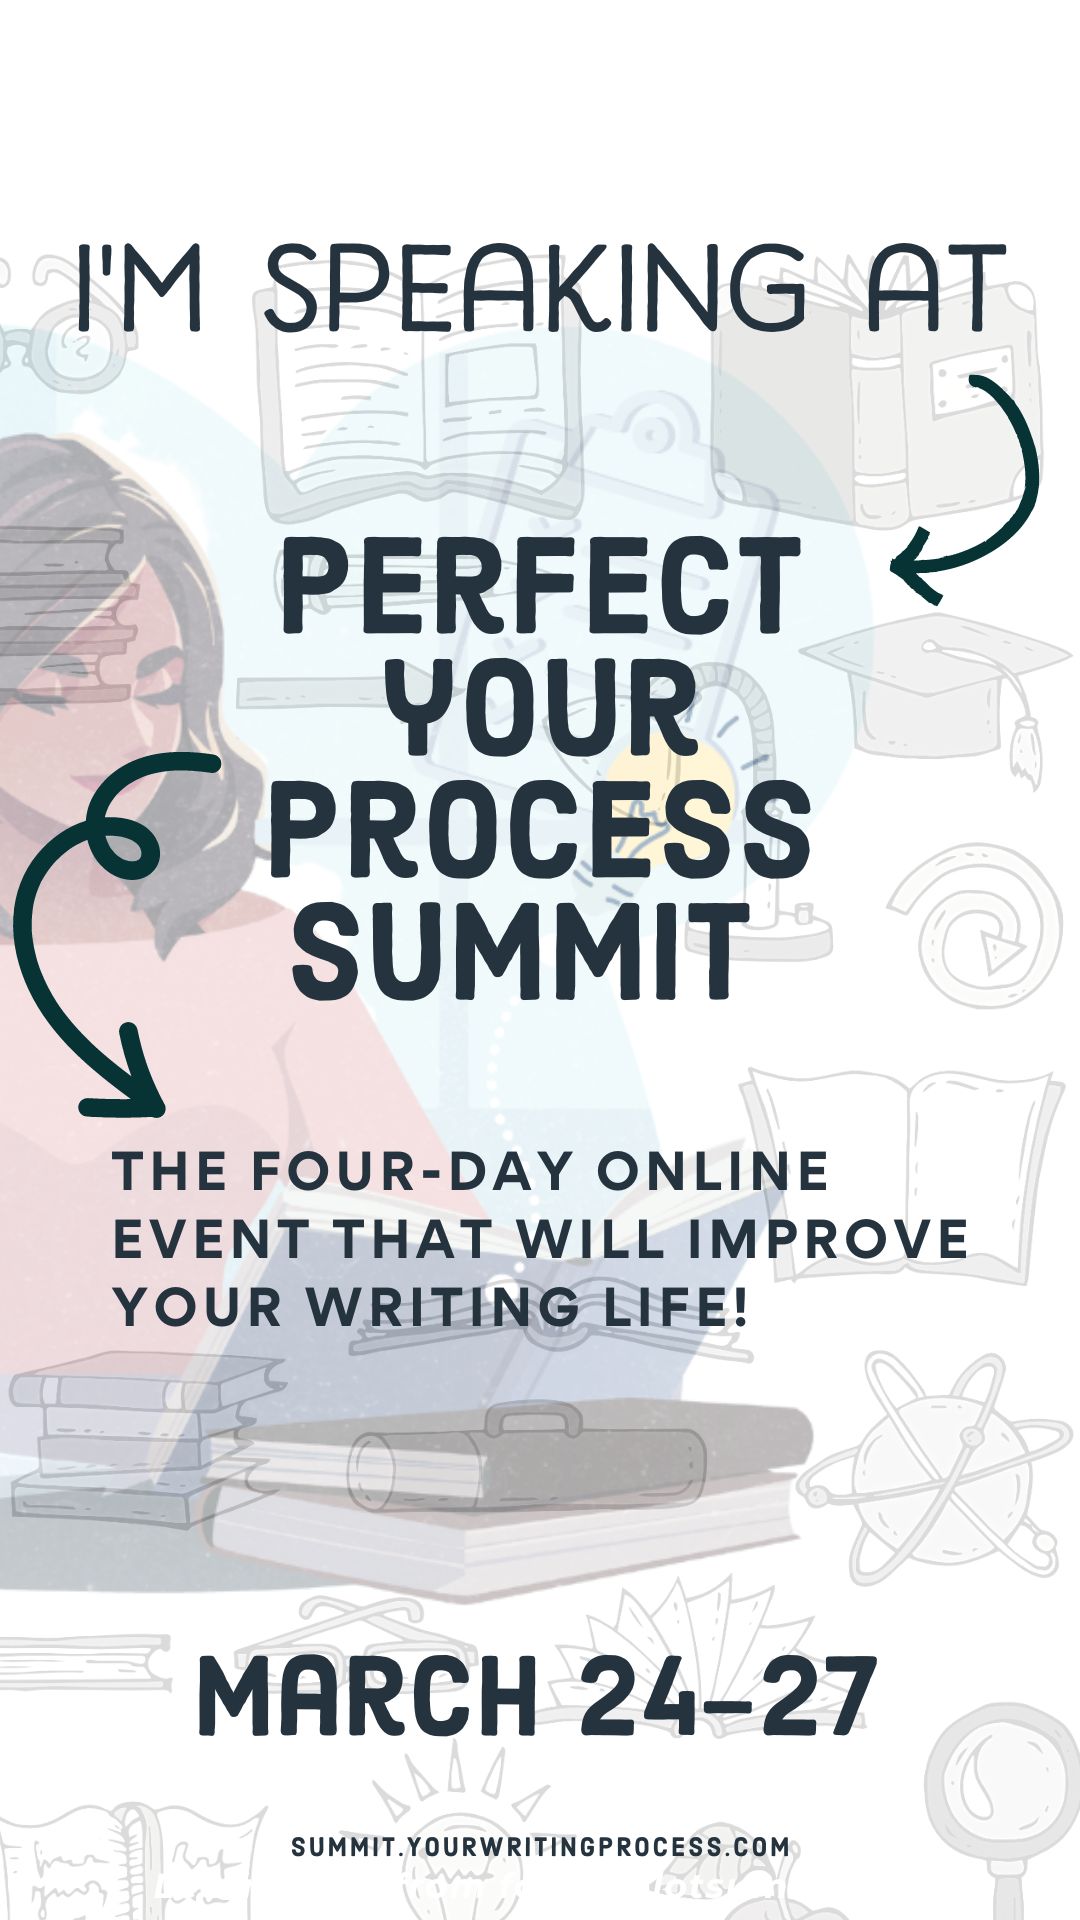 I'm speaking at PERFECT YOUR PROCESS summit